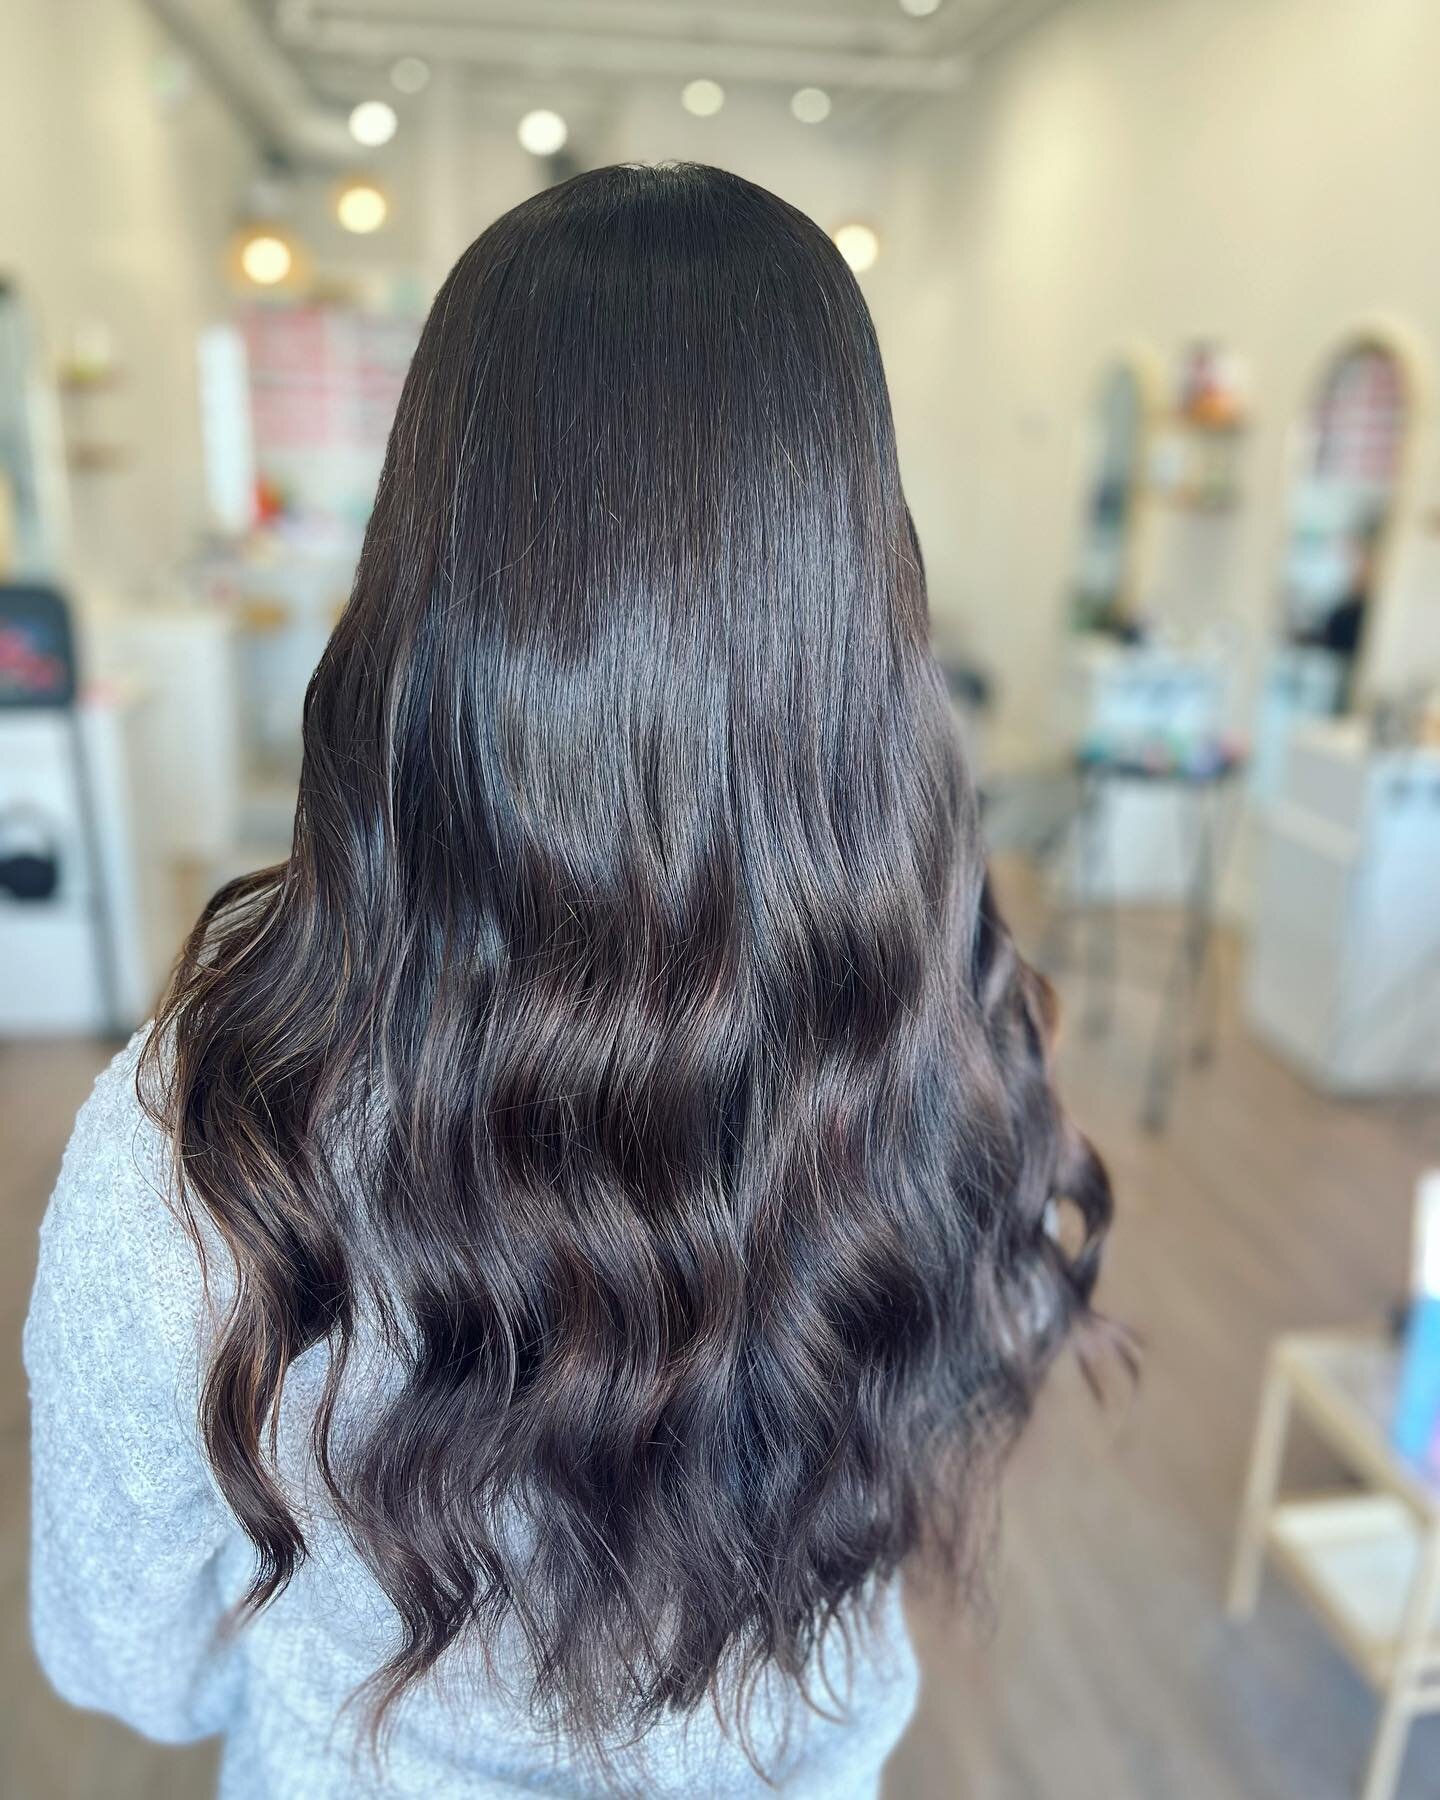 ::Shine: Emit Light::

Gorgeous Brunette by @angela_karma_beauty_room. 

 Dm @angela_karma_beauty_room to book your next appointment. 
.
.
.
.
.
.
.
.
.
.
.
#oakville #oakvillesalon #oakvillehairstylist #oakvillehair #downtownoakville #expensivebrune